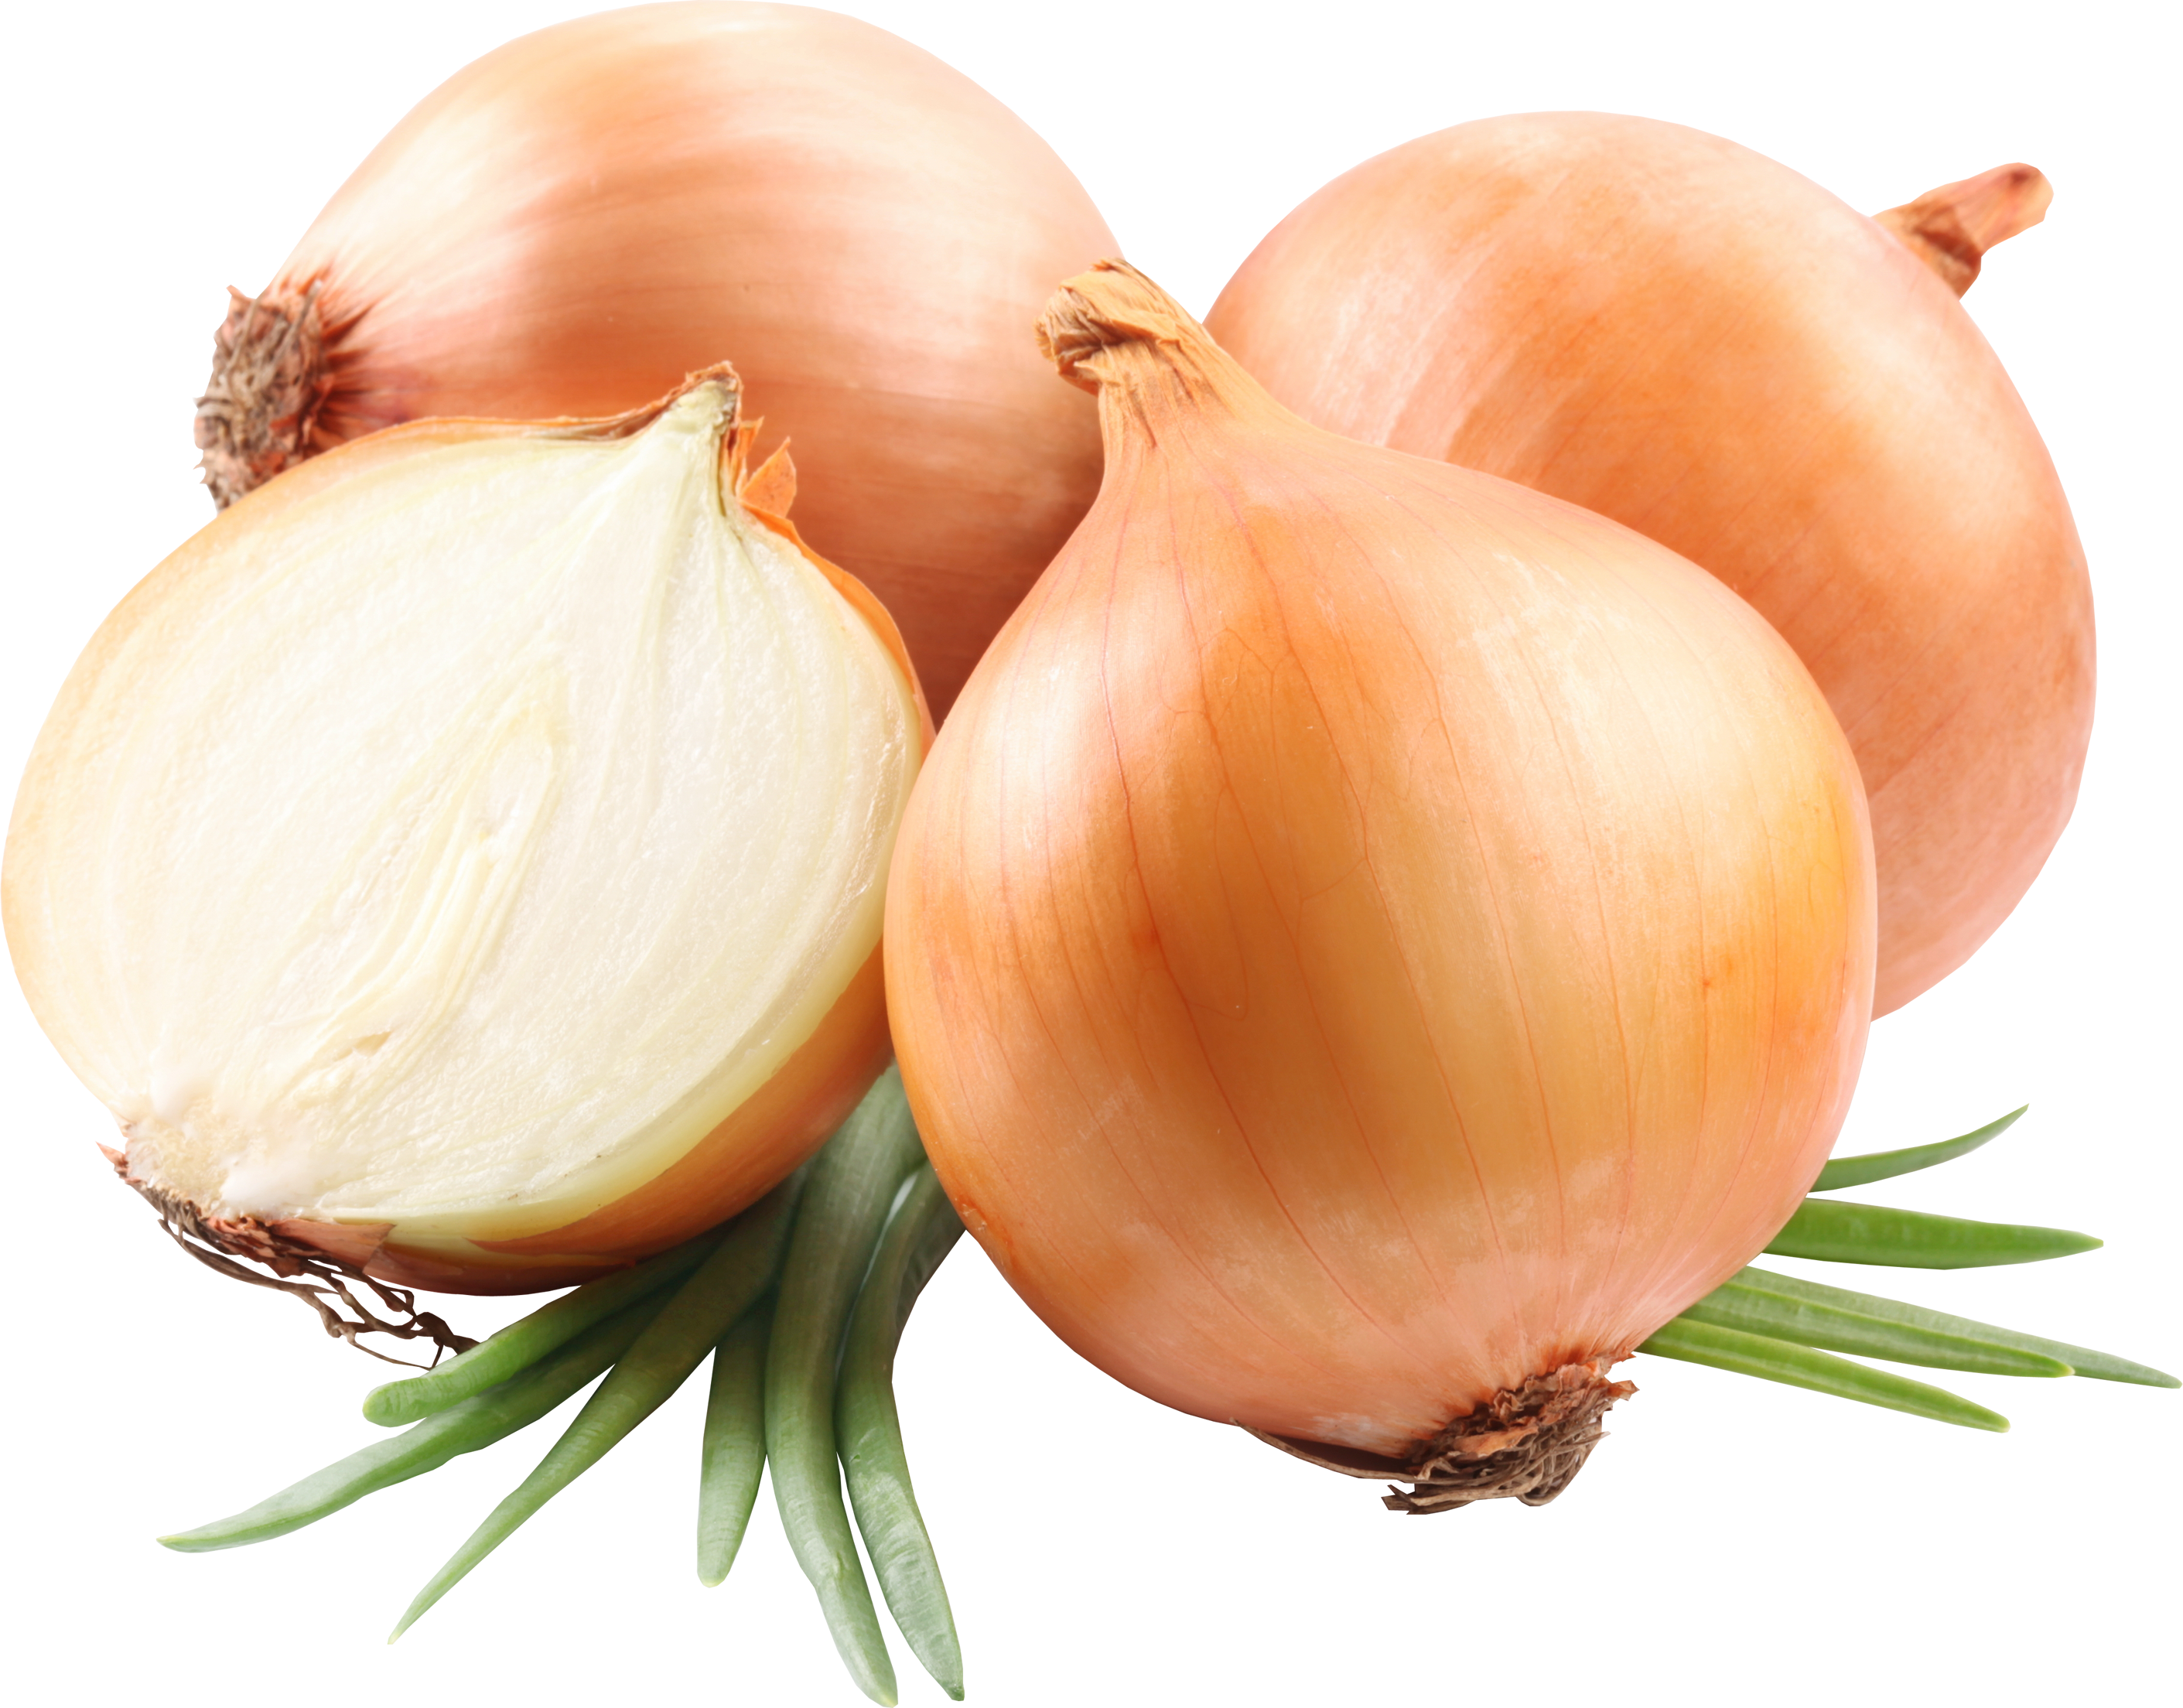 Onion Png Image, Free Download Picture - Onion, Transparent background PNG HD thumbnail